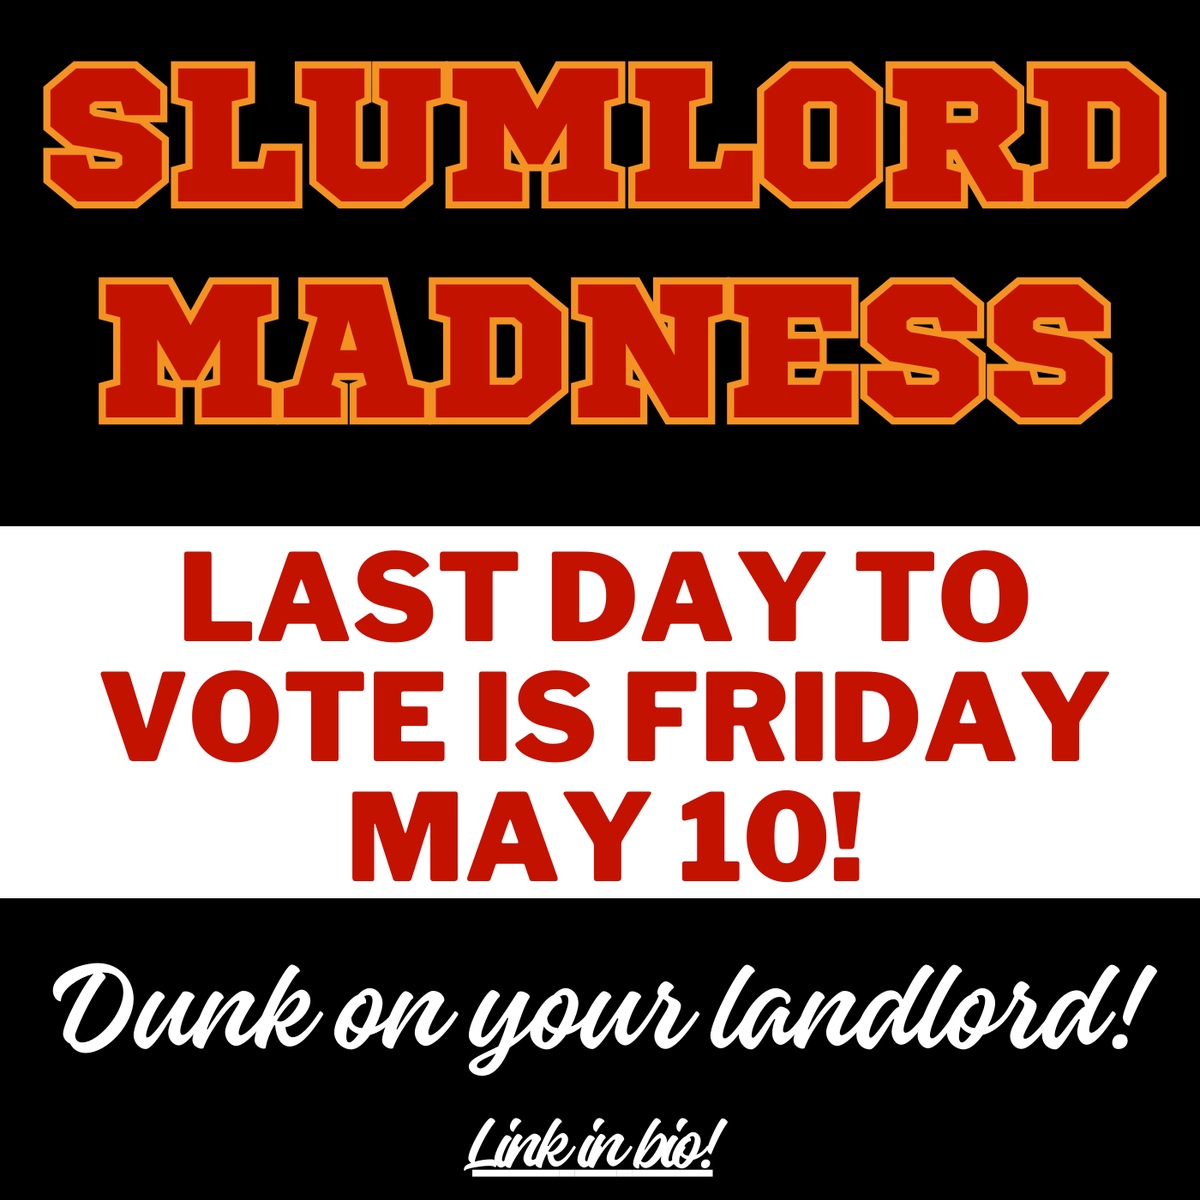 Have you nominated your landlord yet in Slumlord Madness? - Ottawa ACORN’s tournament to determine the worst slumlord in the city? Friday, May 10 is your last chance before we close the polls! Link in bio to submit your slumlord!